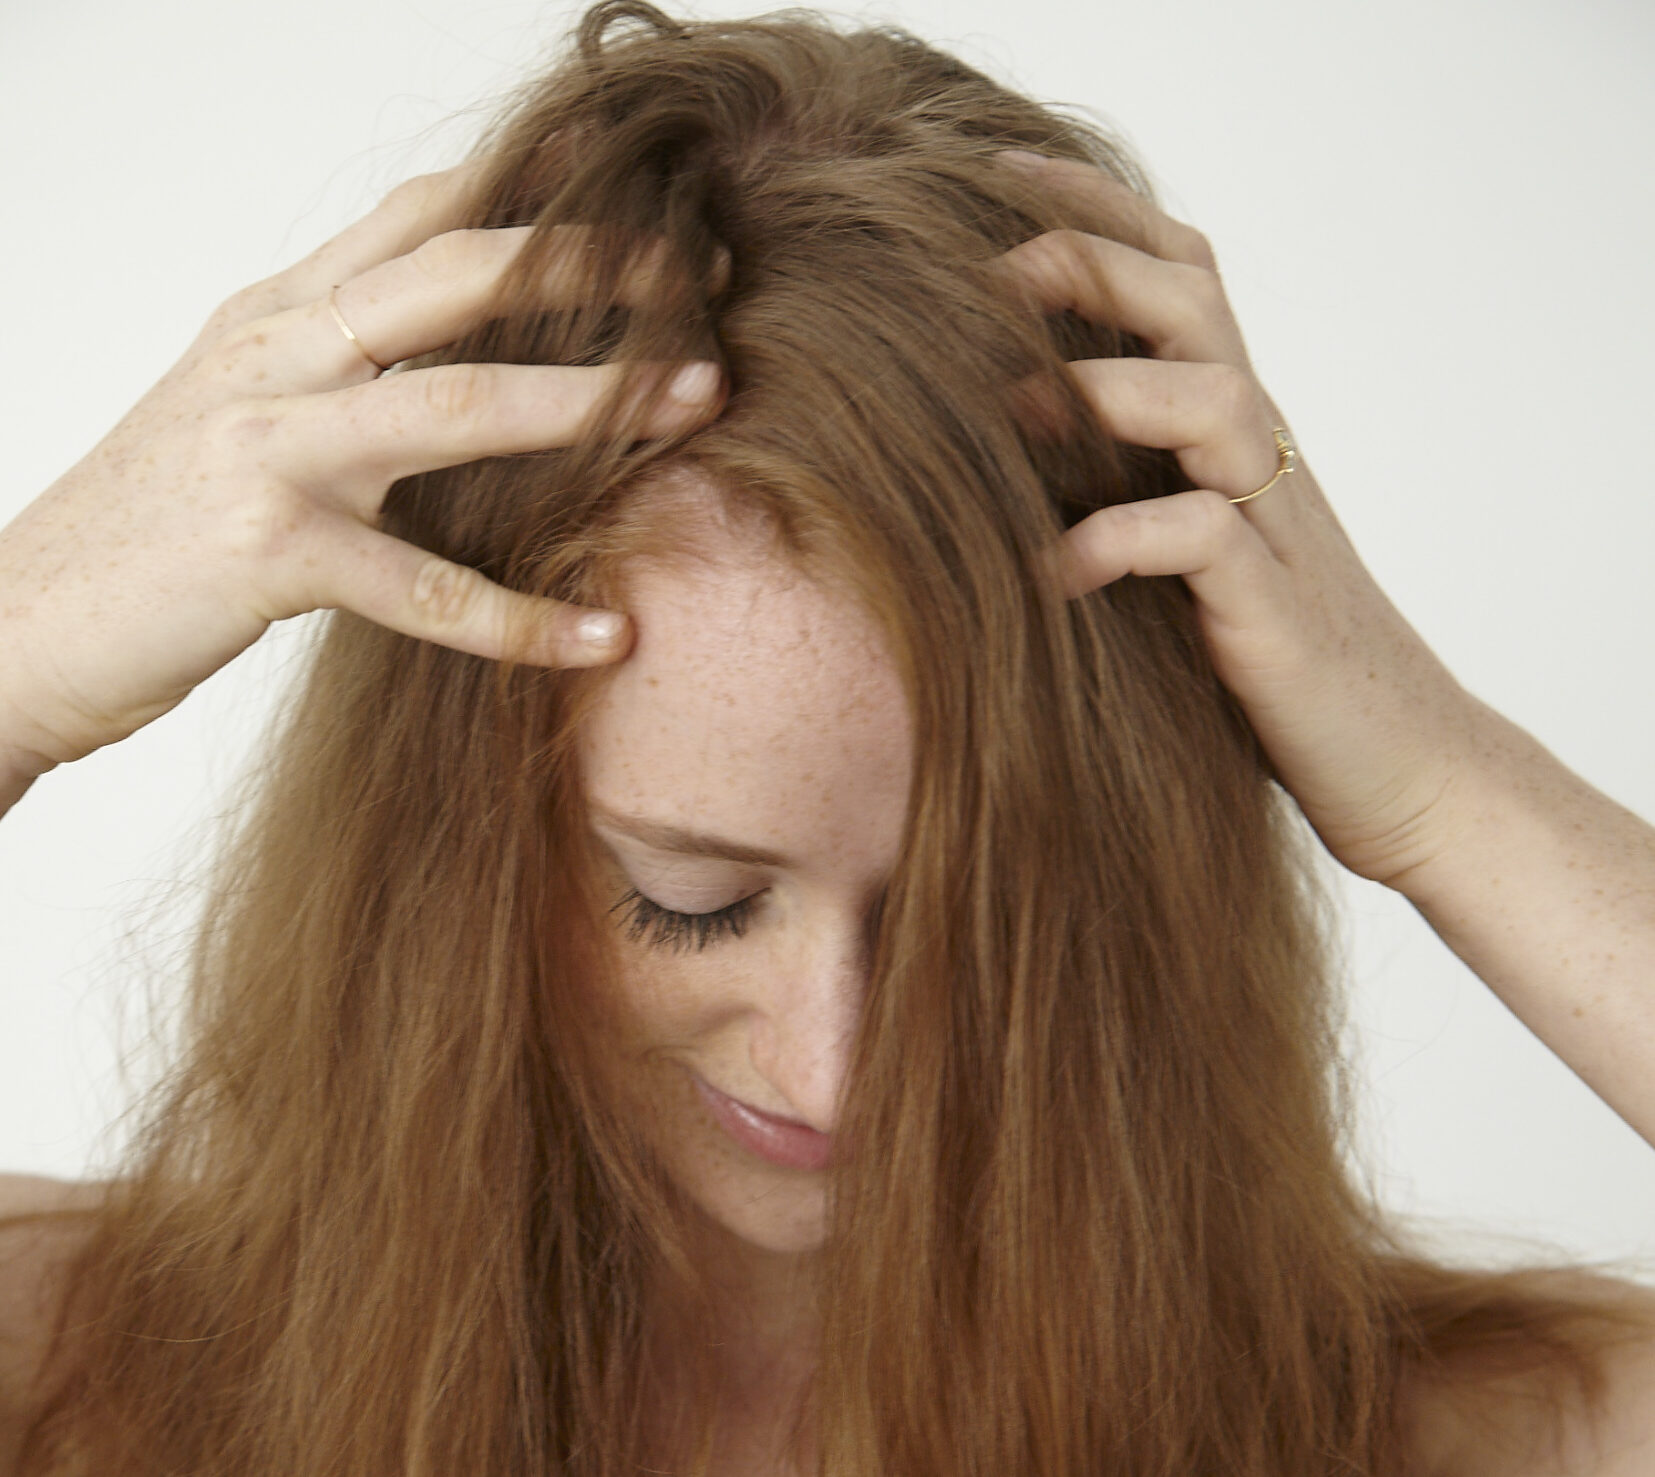 How to Detox Your Sensitive Redhead Scalp for Healthier Hair